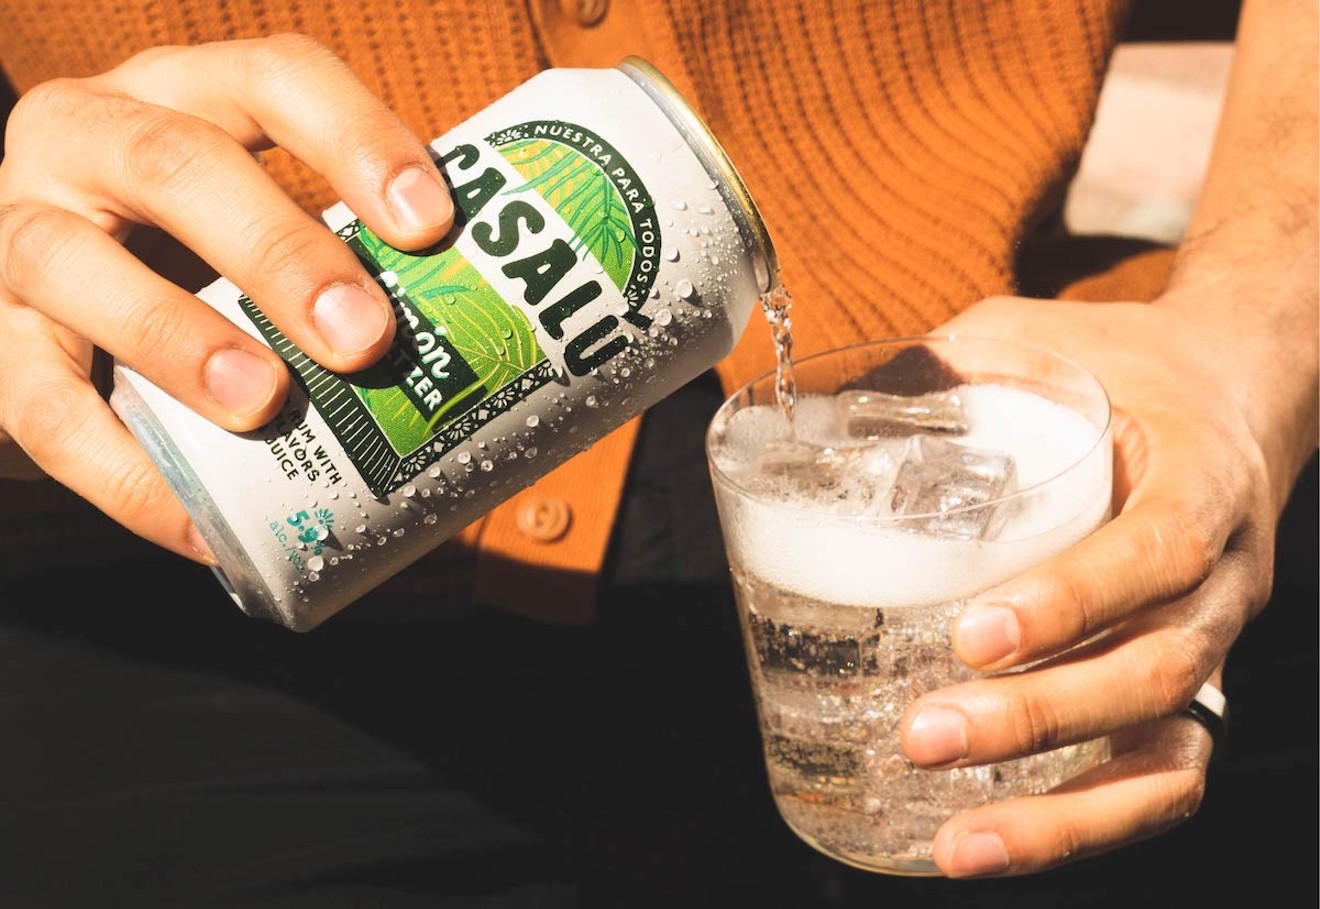 Casalú is a rum-based hard seltzer that invites everyone to share in Latino culture.